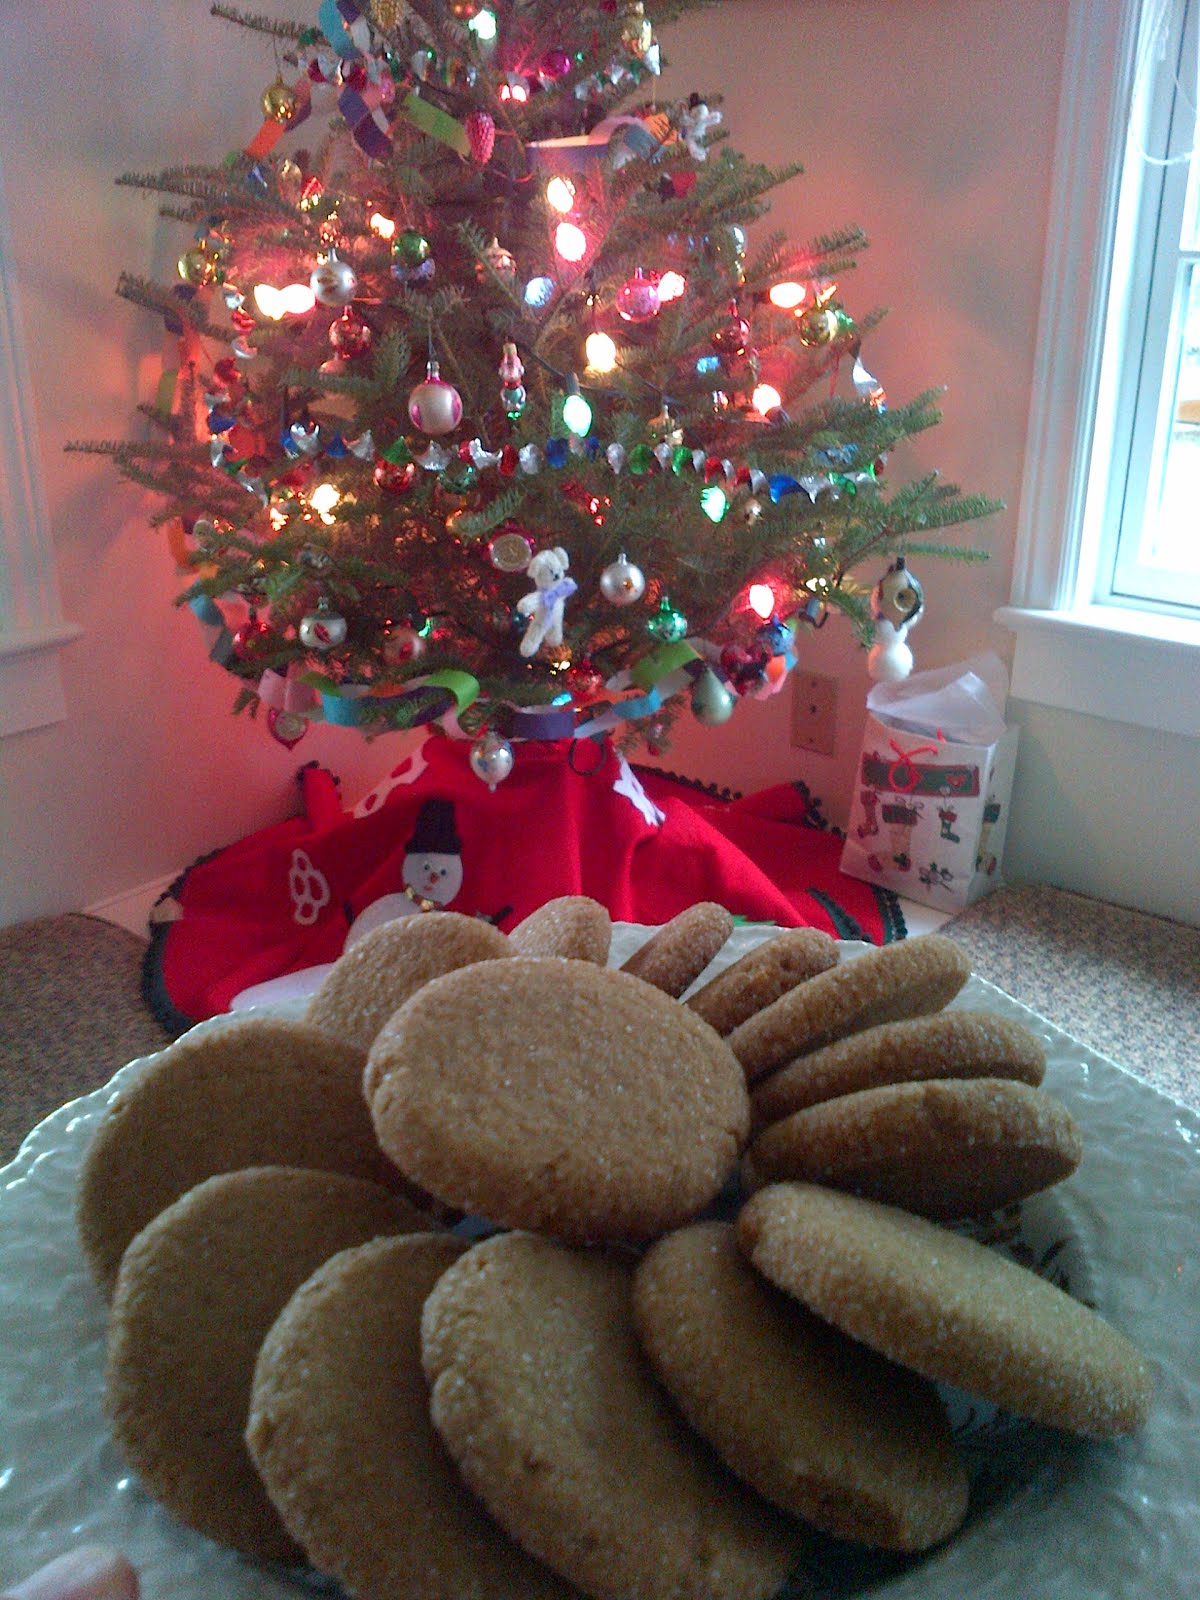 Nothing says Christmas like ginger cookies...